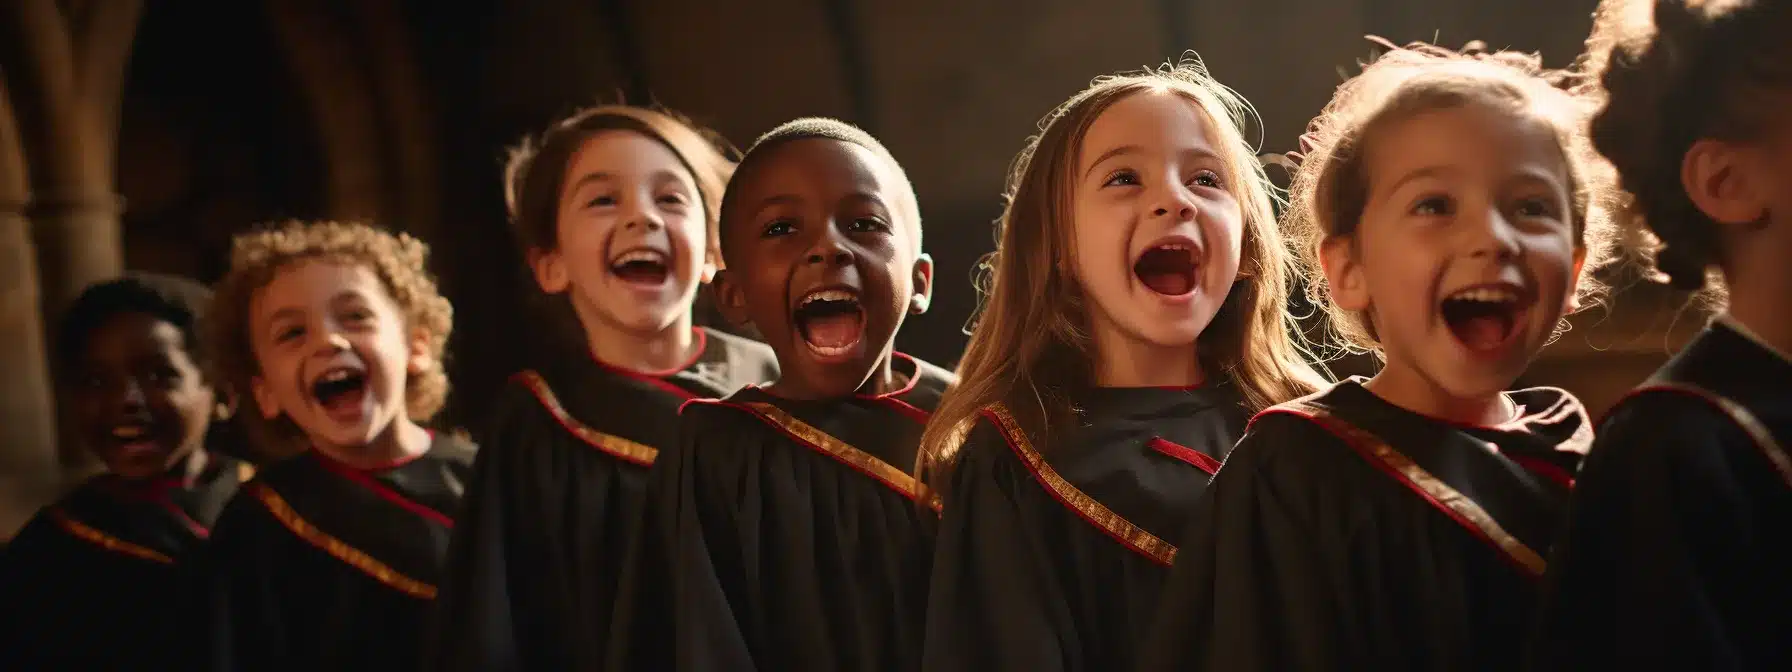 a group of choristers standing together, singing in harmony with joyous expressions on their faces.